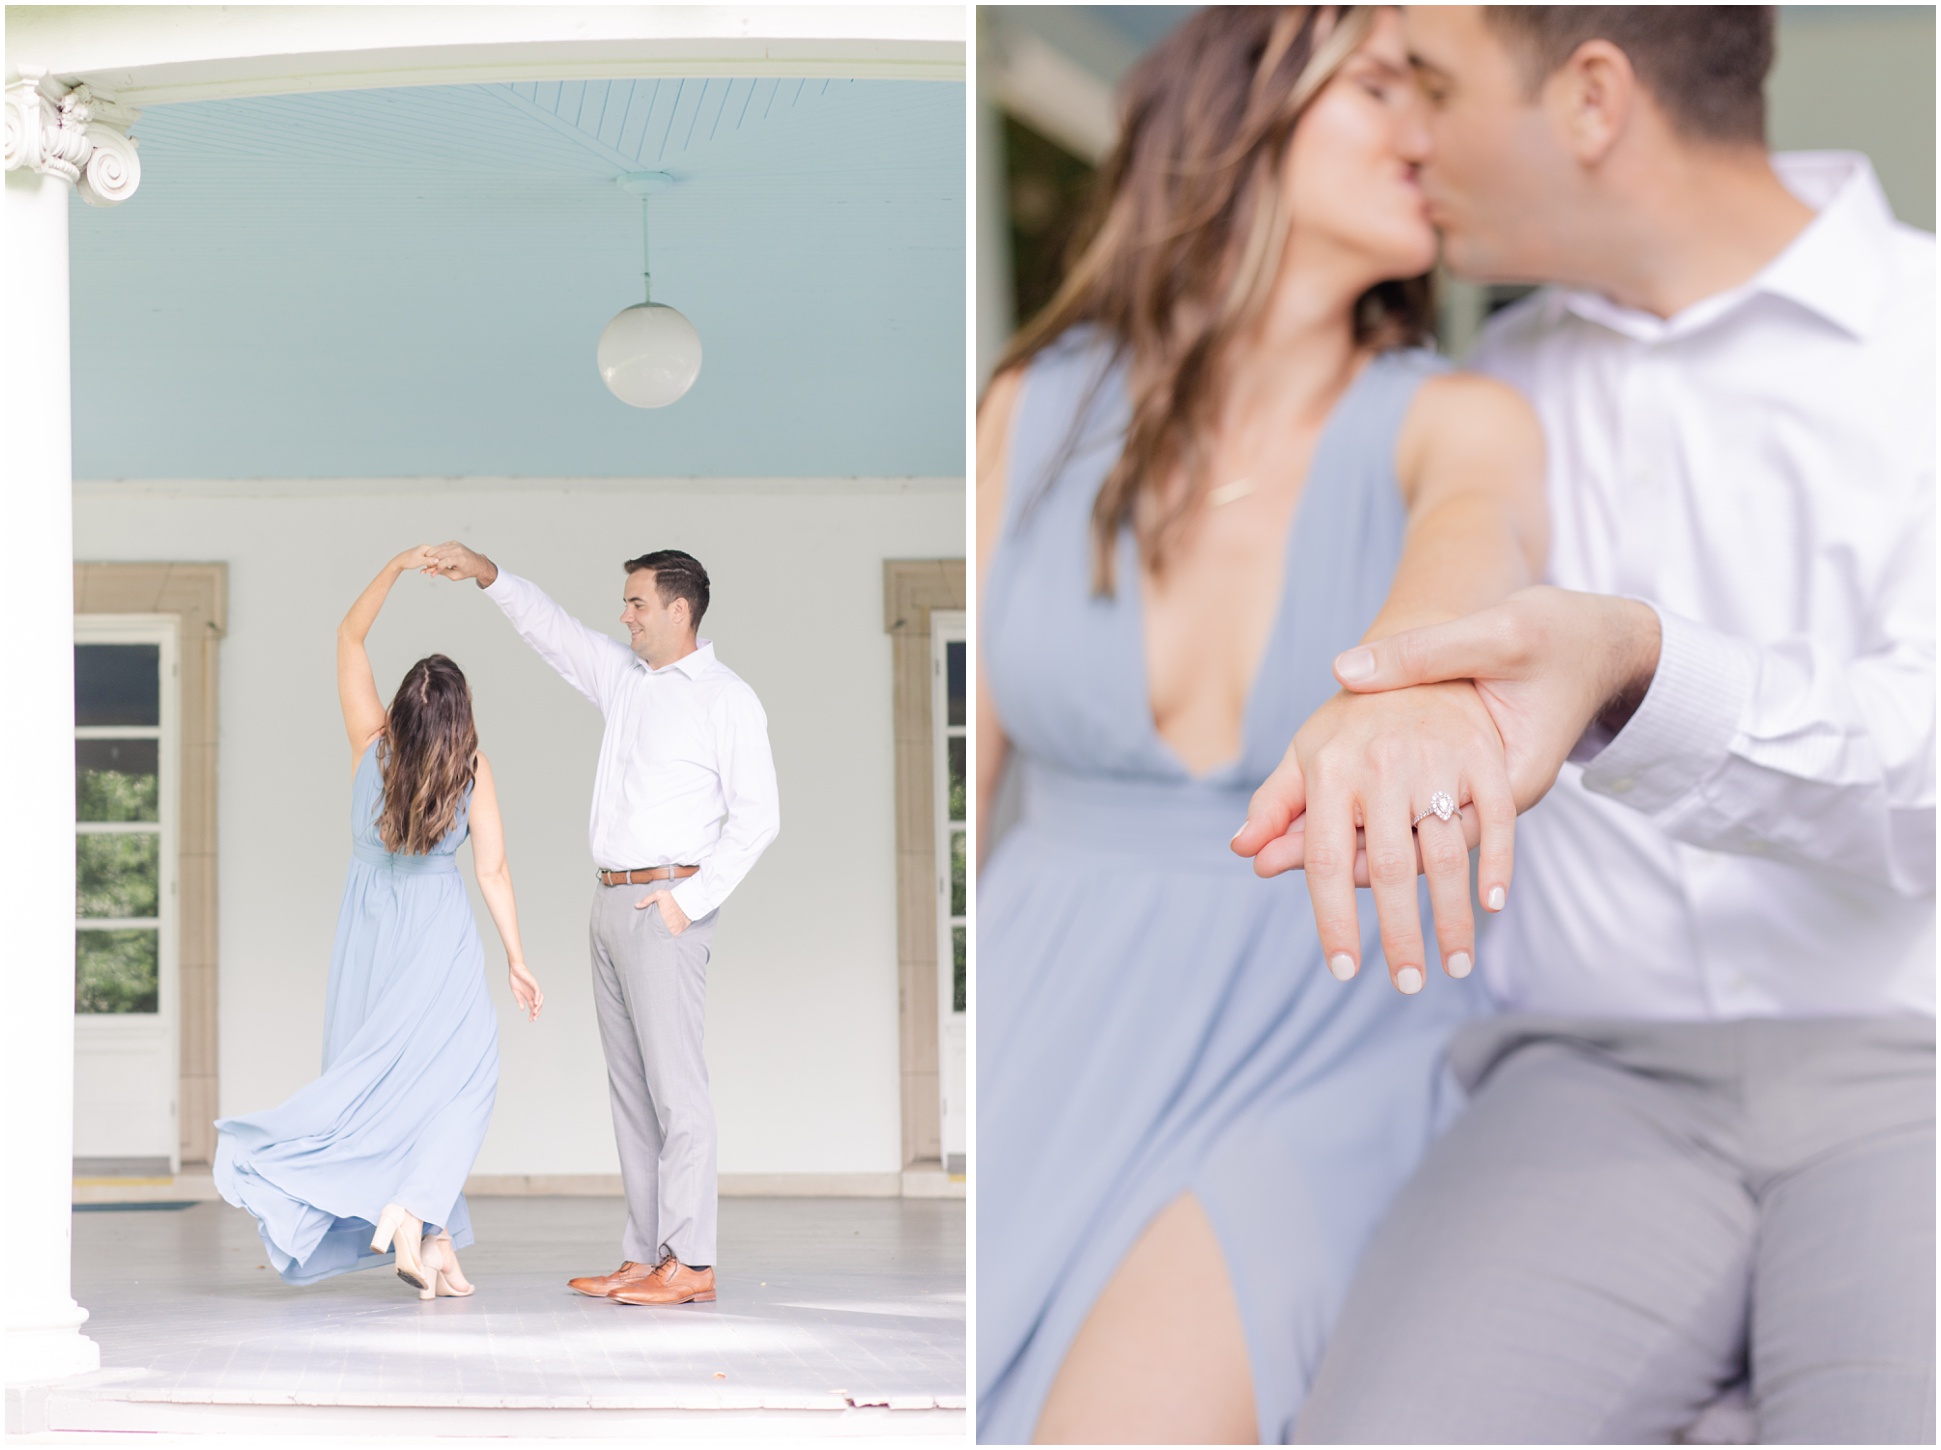 On the left, Angela and Jeff are dancing under the blue ceiling and on the right, they are kissing as they showcase Angela's engagement ring